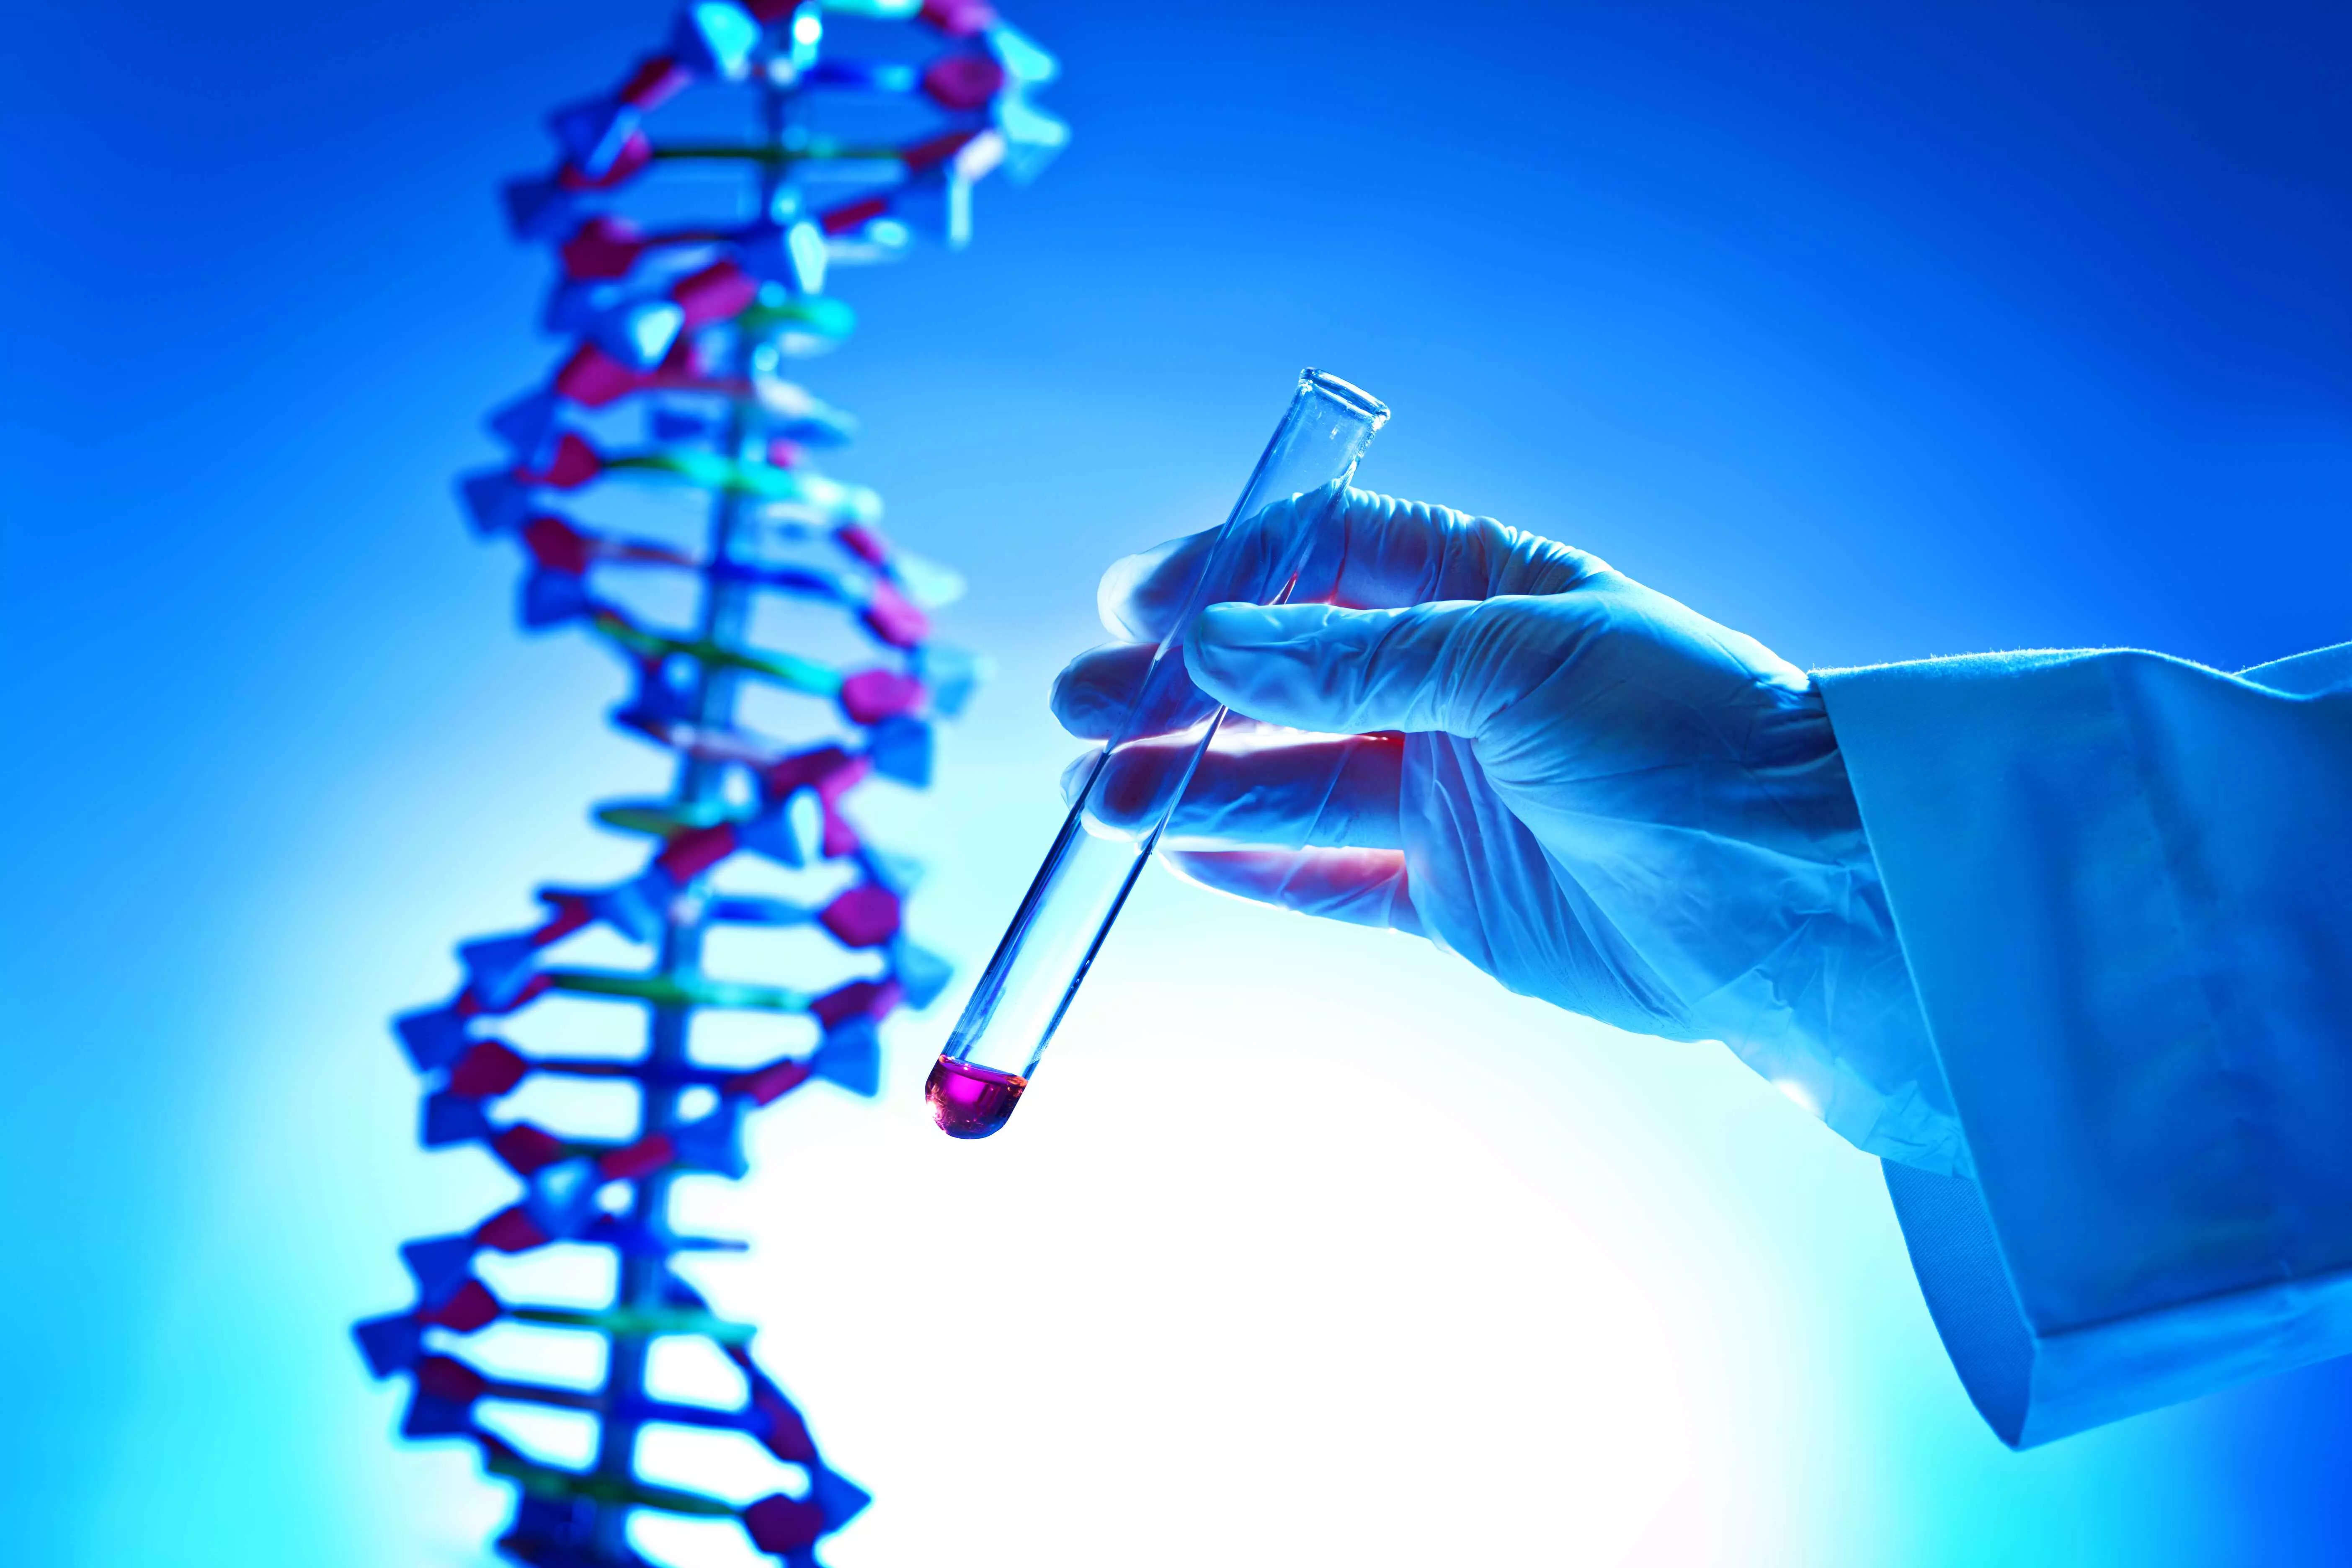 IIT Kanpur licenses gene therapy technology to Reliance Life Sciences